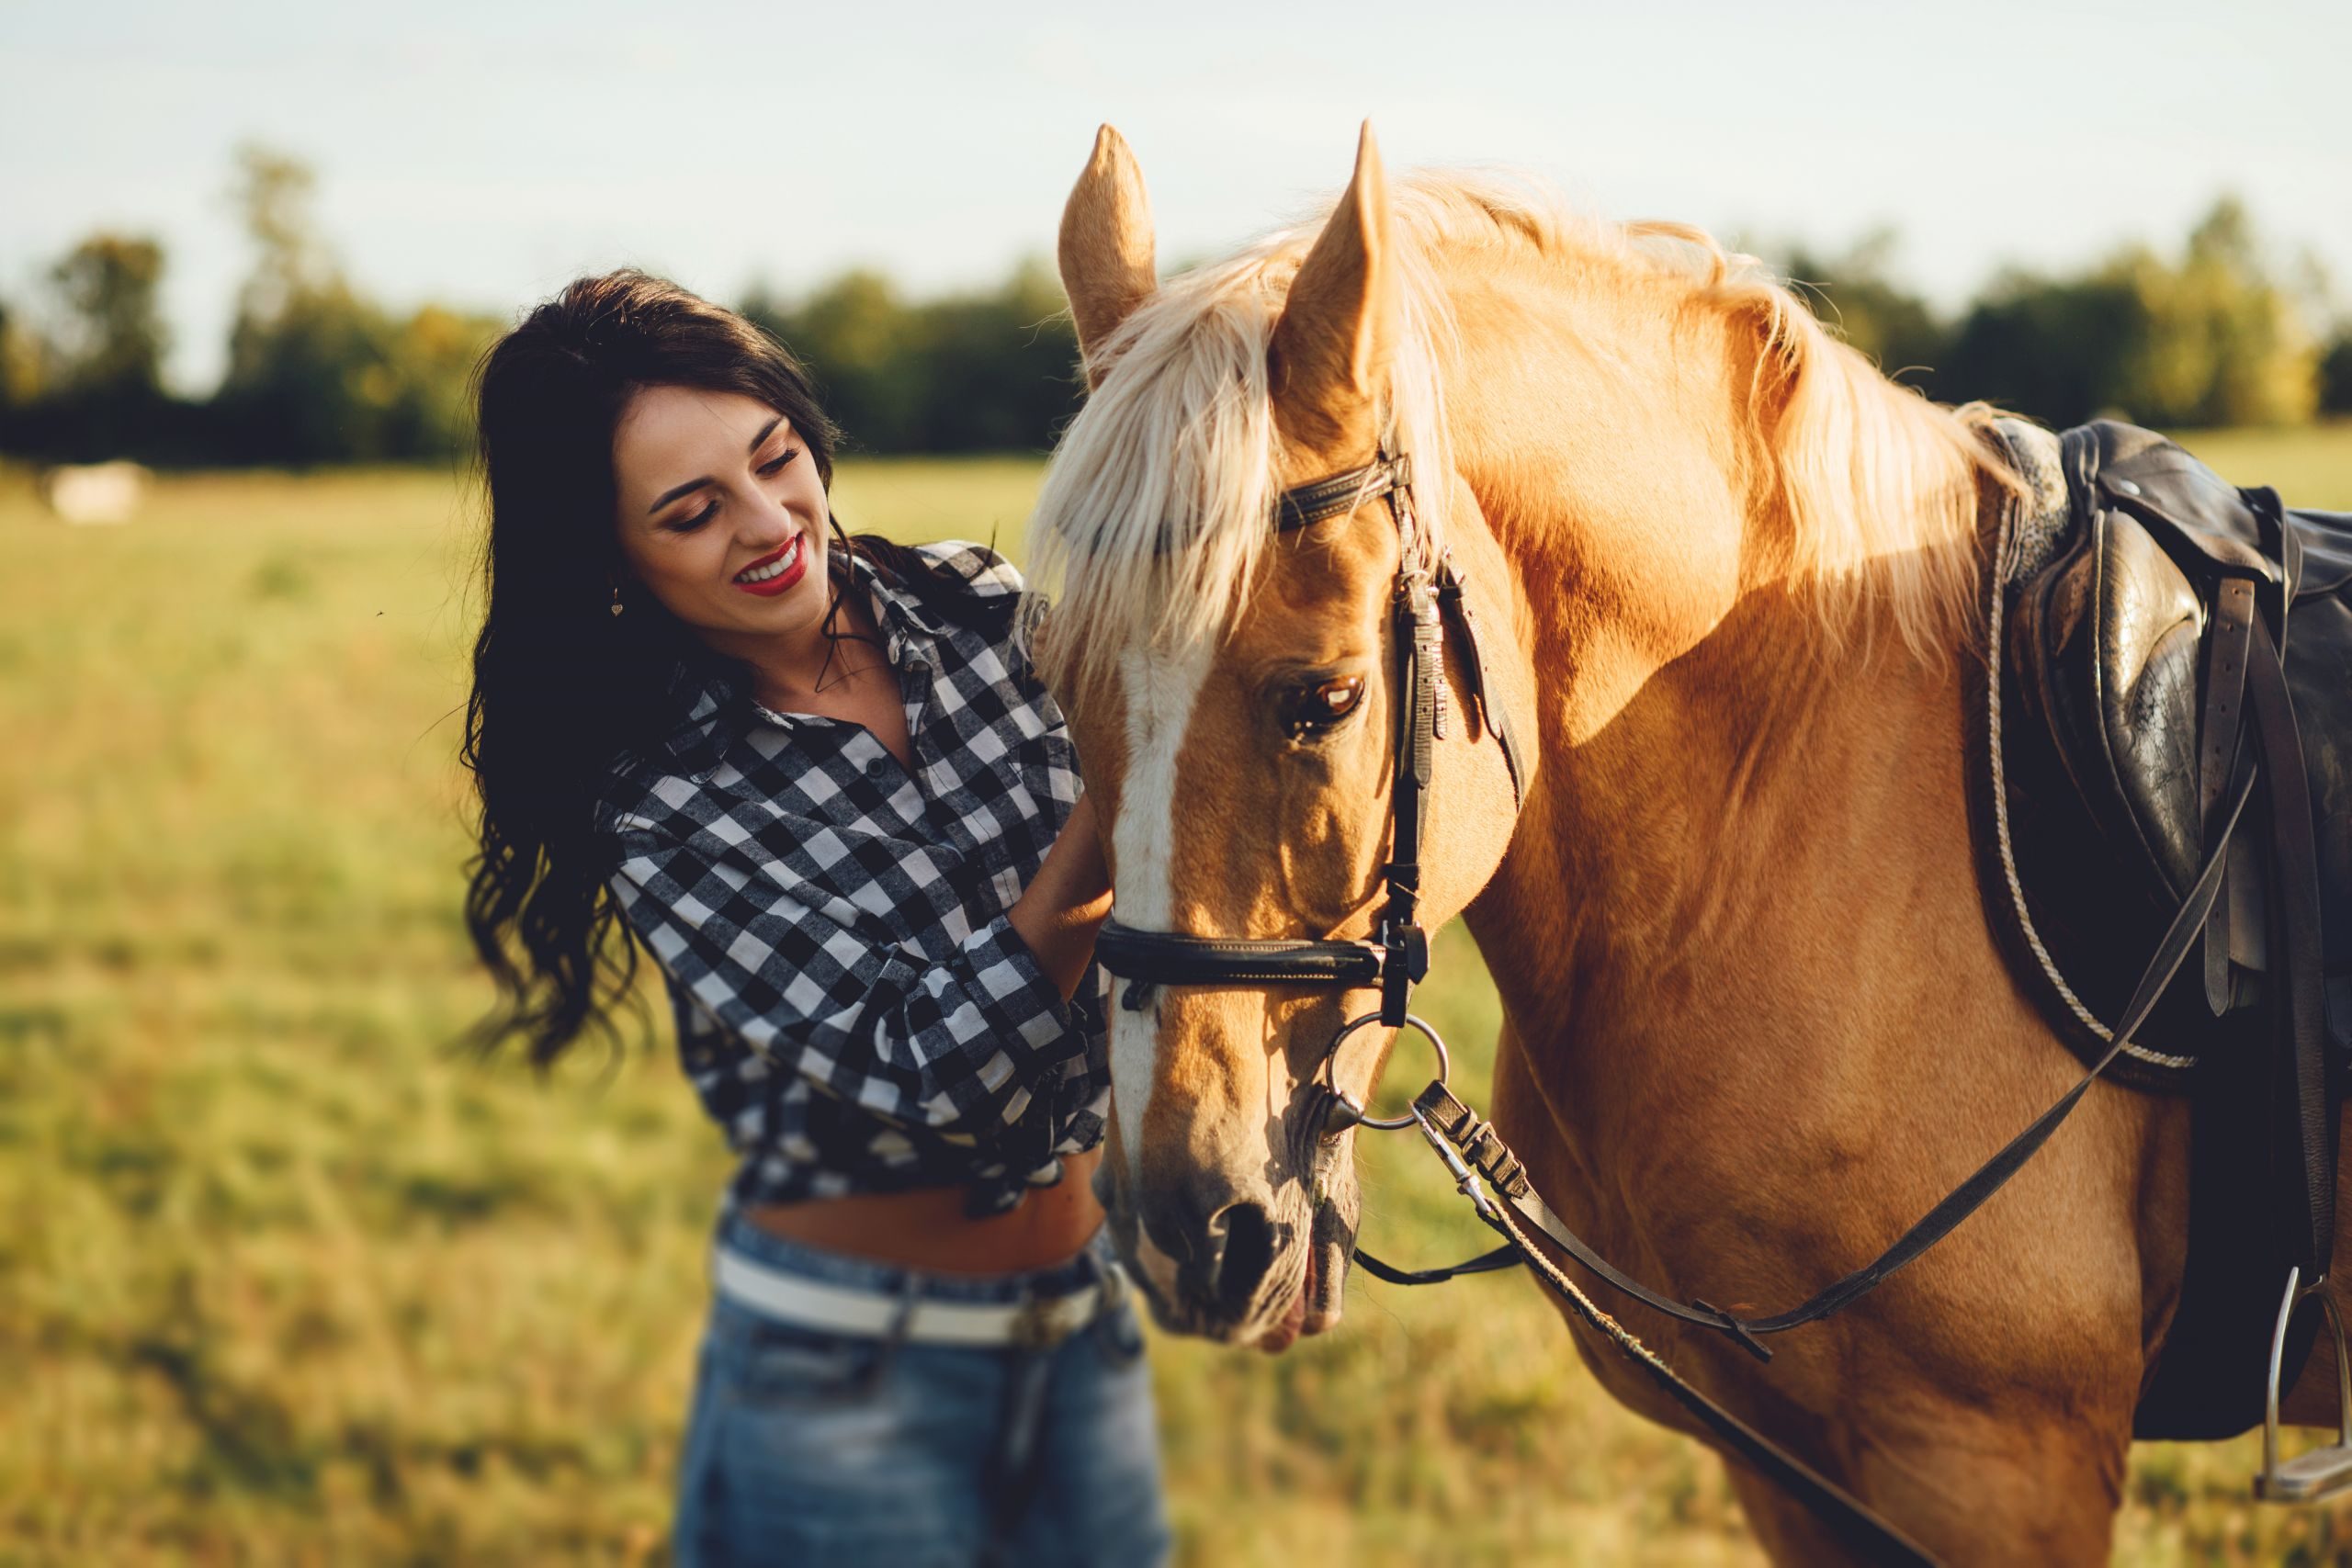 Woman working with Horse in Equine therapy - Types of Trauma Therapy